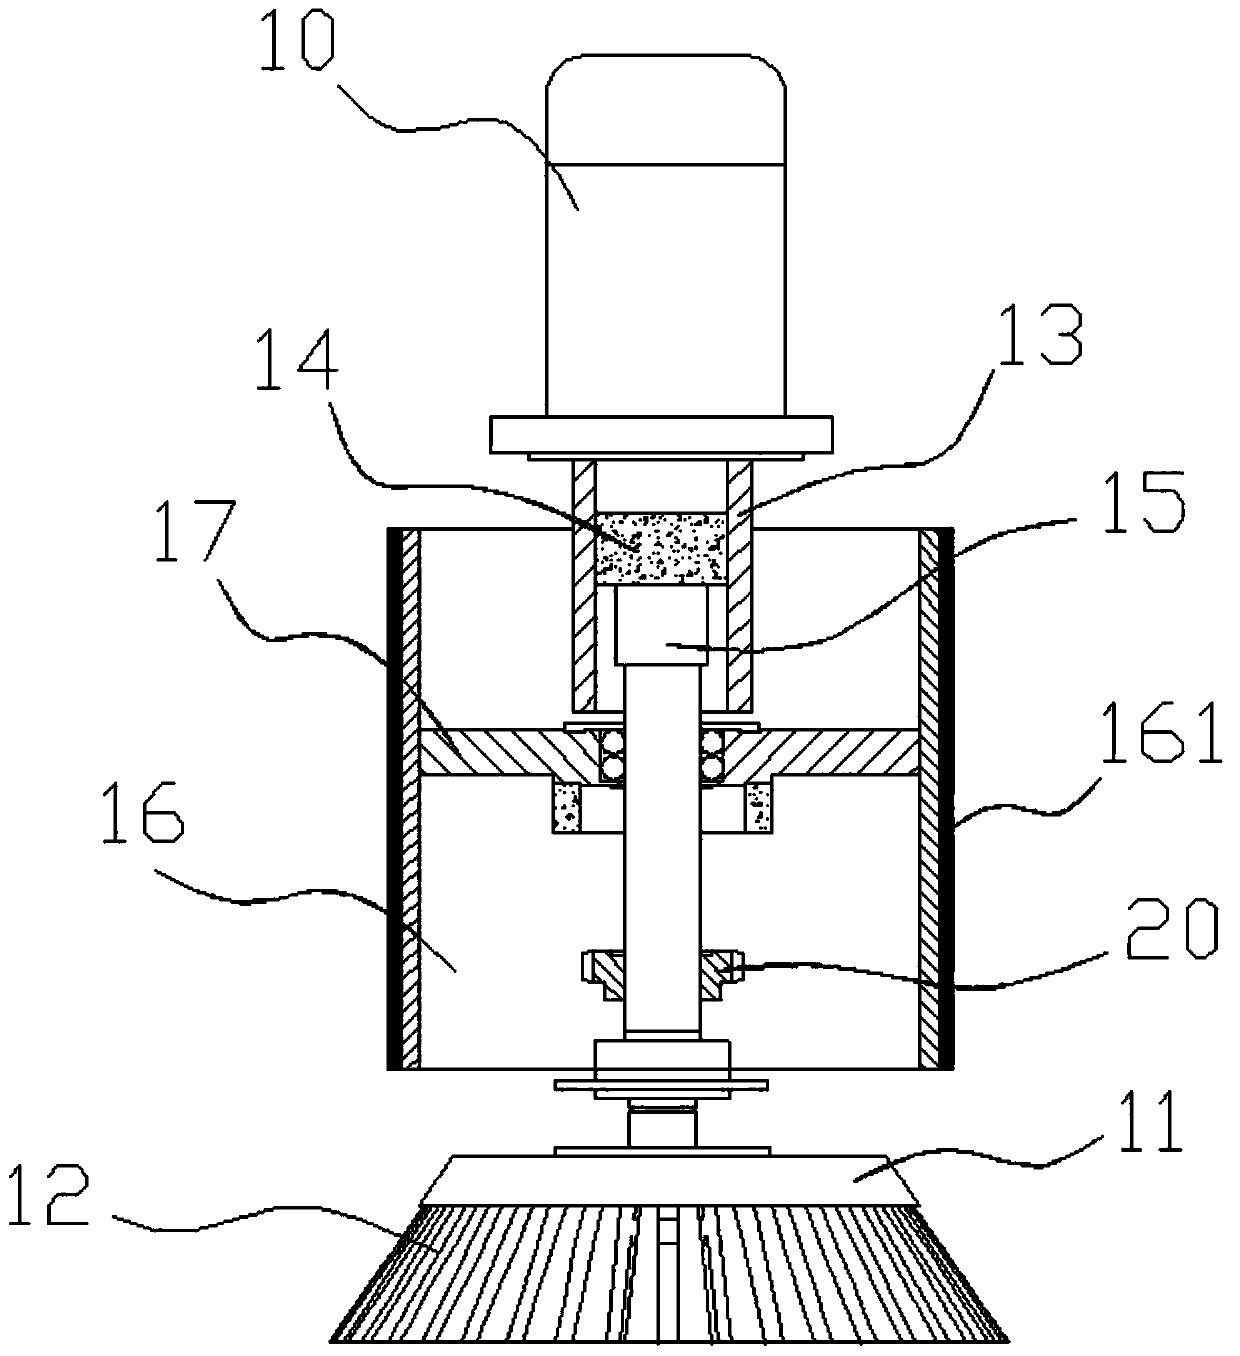 A telescopic multi-directional cleaning device